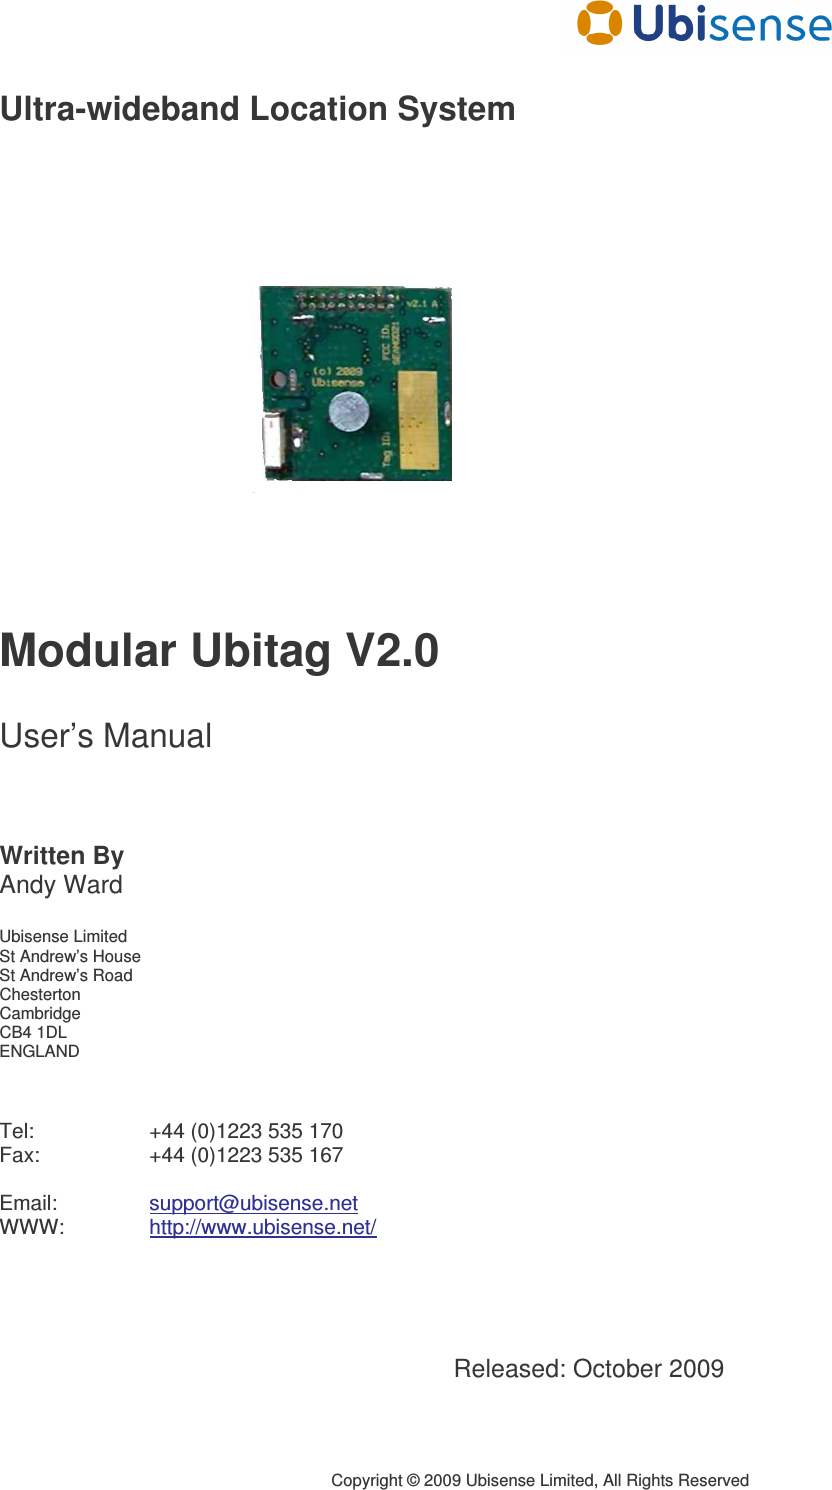      Copyright © 2009 Ubisense Limited, All Rights Reserved Ultra-wideband Location System             Modular Ubitag V2.0  User’s Manual    Written By Andy Ward  Ubisense Limited St Andrew’s House St Andrew’s Road Chesterton Cambridge CB4 1DL ENGLAND    Tel:     +44 (0)1223 535 170 Fax:     +44 (0)1223 535 167  Email:     support@ubisense.net WWW:    http://www.ubisense.net/     Released: October 2009 